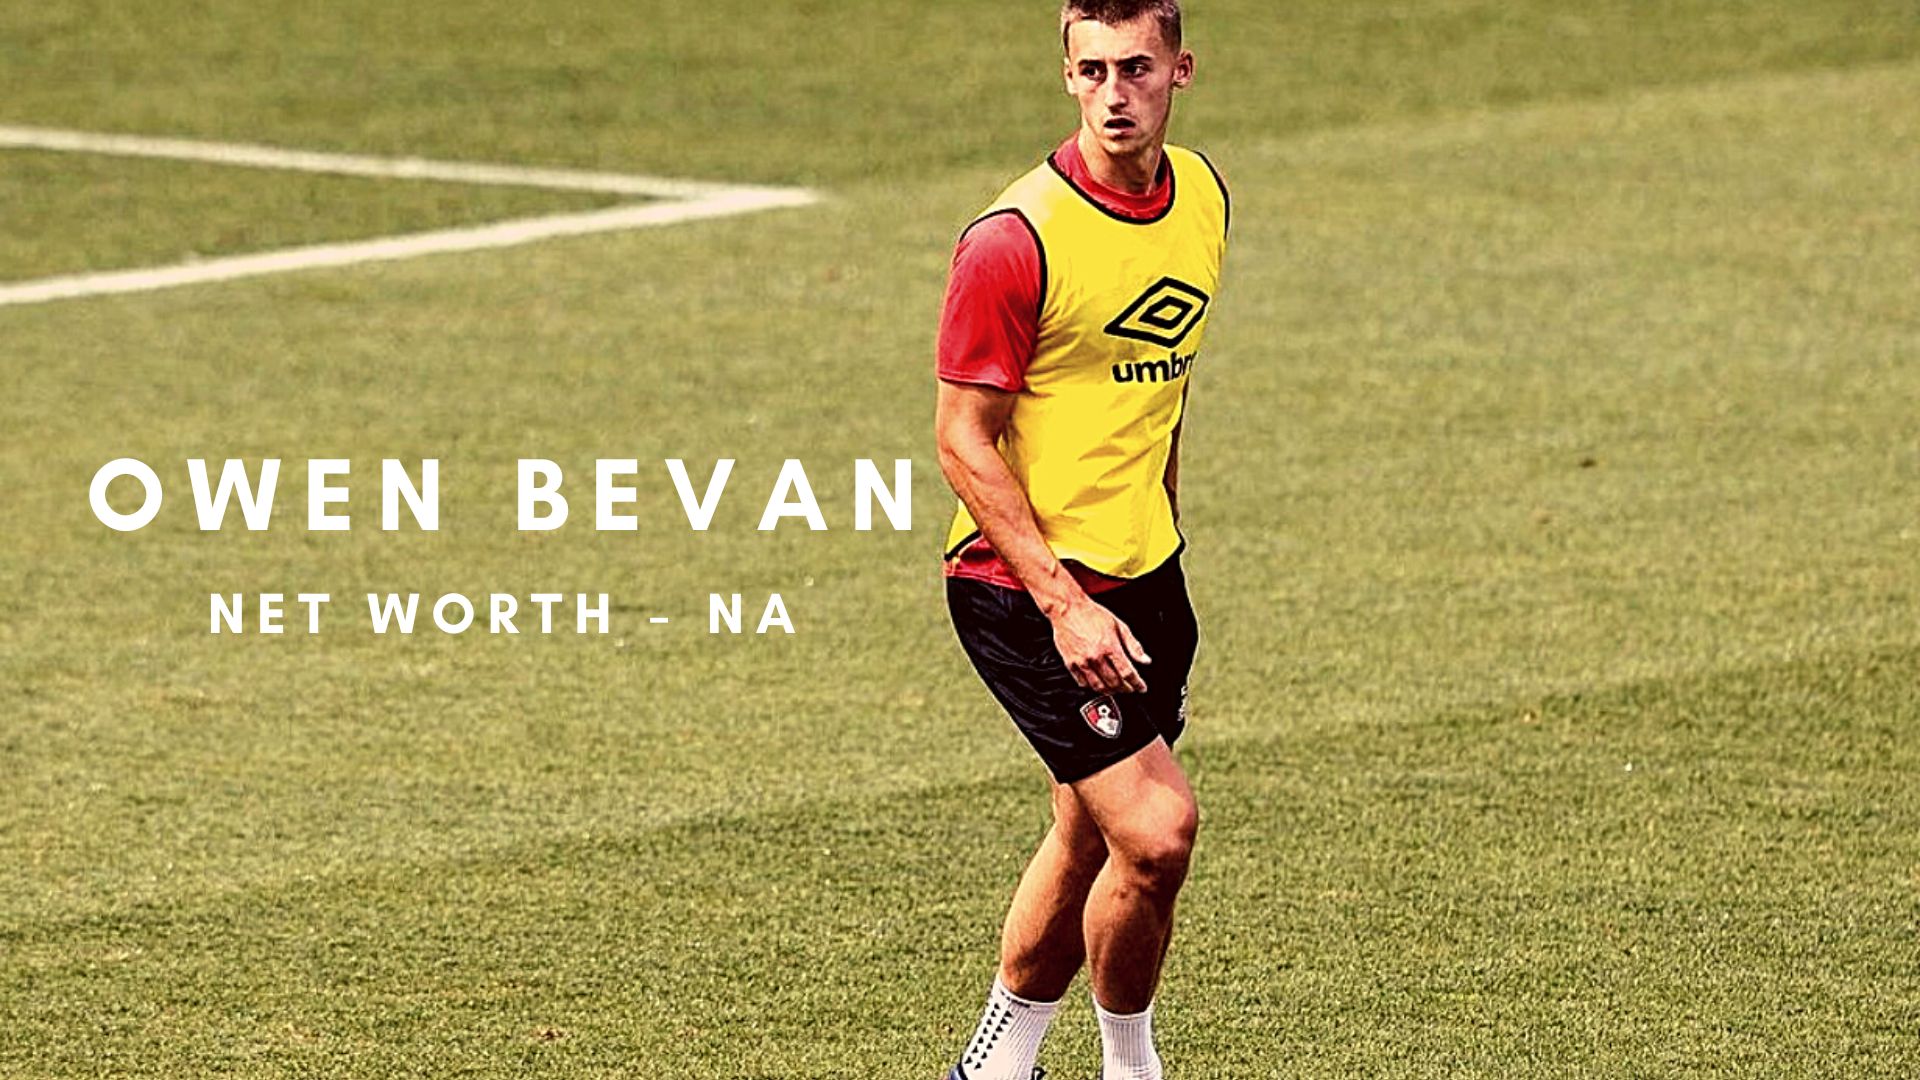 Owen Bevan plays as a centre-back for National League club Yeovil Town on loan from AFC Bournemouth. (Credits: @owenbevan6 Instagram)